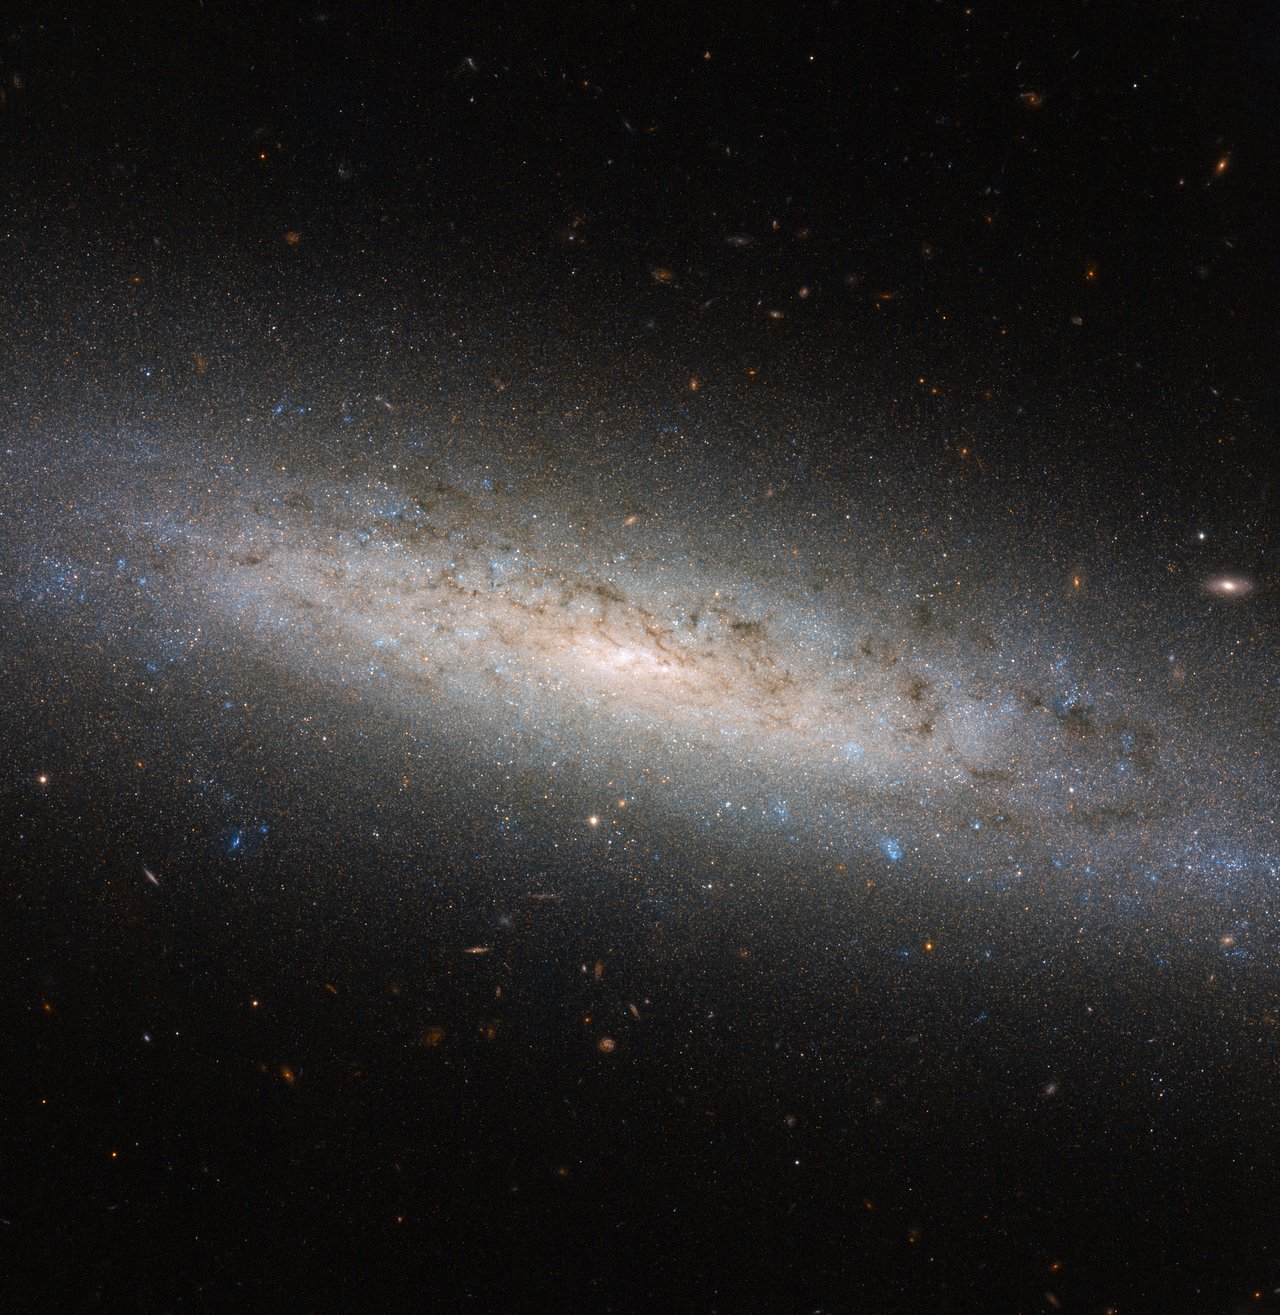   This shining disc of a spiral galaxy sits approximately 25 million light-years away from Earth in the constellation of Sculptor. Named NGC 24, the galaxy was discovered by British astronomer William Herschel in 1785, and measures some 40 000 light-years across. This picture was taken using the NASA/ESA Hubble Space Telescope’s Advanced Camera for Surveys, known as ACS for short. It shows NGC 24 in detail, highlighting the blue bursts (young stars), dark lanes (cosmic dust), and red bubbles (hydrogen gas) of material peppered throughout the galaxy’s spiral arms. Numerous distant galaxies can also been seen hovering around NGC 24’s perimeter. However, there may be more to this picture than first meets the eye. Astronomers suspect that spiral galaxies like NGC 24 and the Milky Way are surrounded by, and contained within, extended haloes of dark matter. Dark matter is a mysterious substance that cannot be seen; instead, it reveals itself via its gravitational interactions with surrounding material. Its existence was originally proposed to explain why the outer parts of galaxies, including our own, rotate unexpectedly fast, but it is thought to also play an essential role in a galaxy’s formation and evolution. Most of NGC 24’s mass — a whopping 80 % — is thought to be held within such a dark halo.